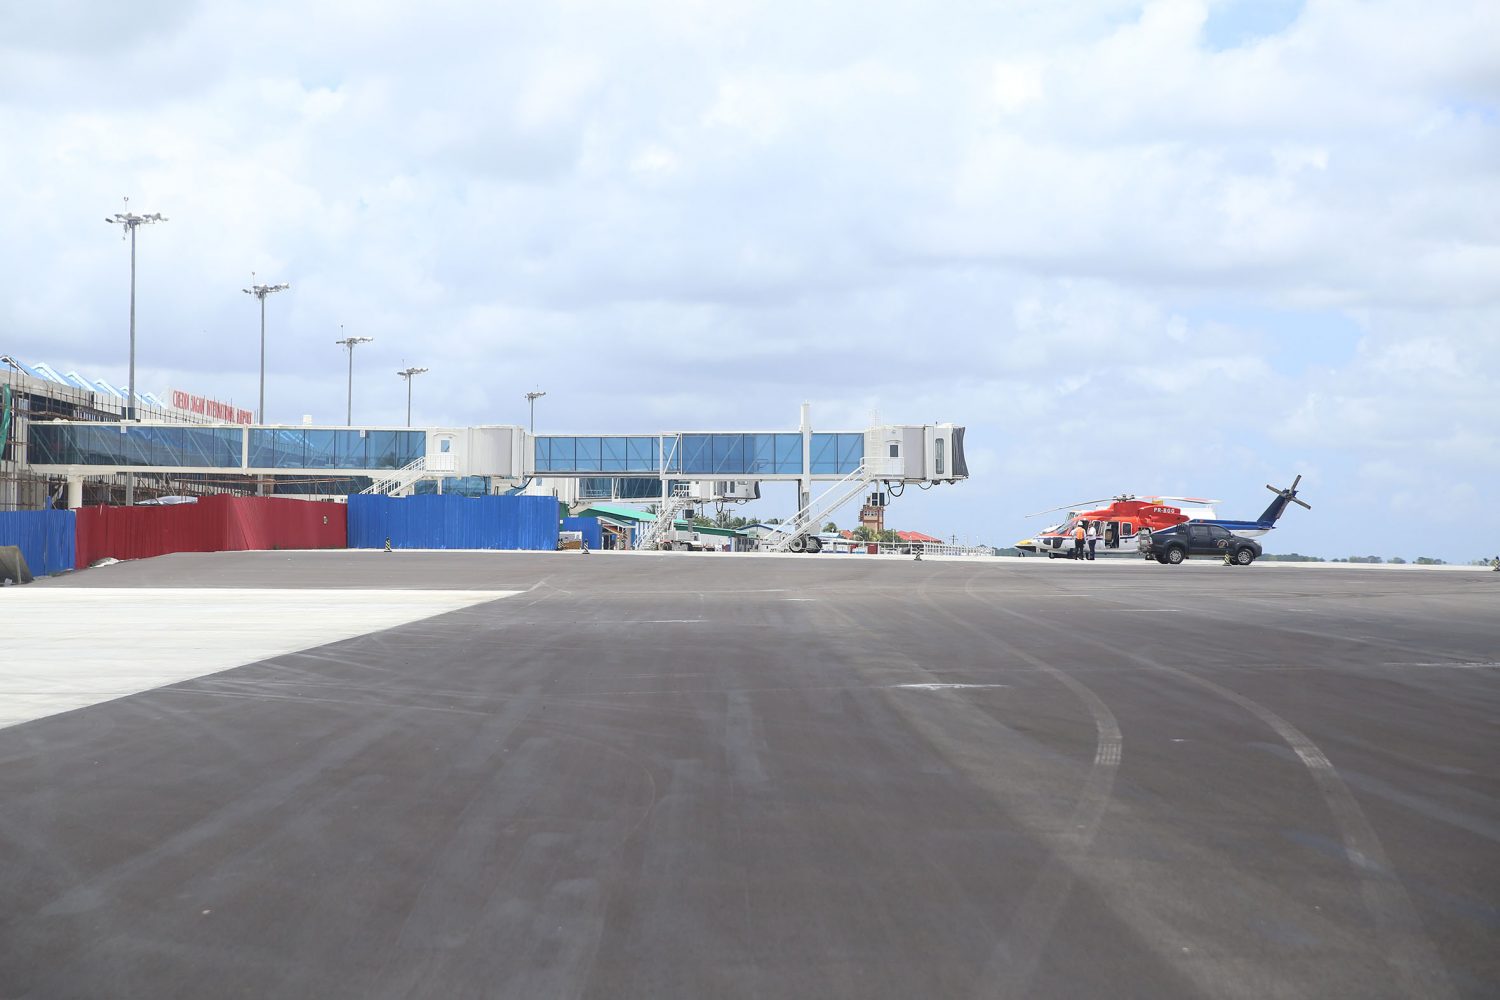 One of two new passenger boarding bridges at the Cheddi Jagan International Airport. (Photo by Terrence Thompson)
